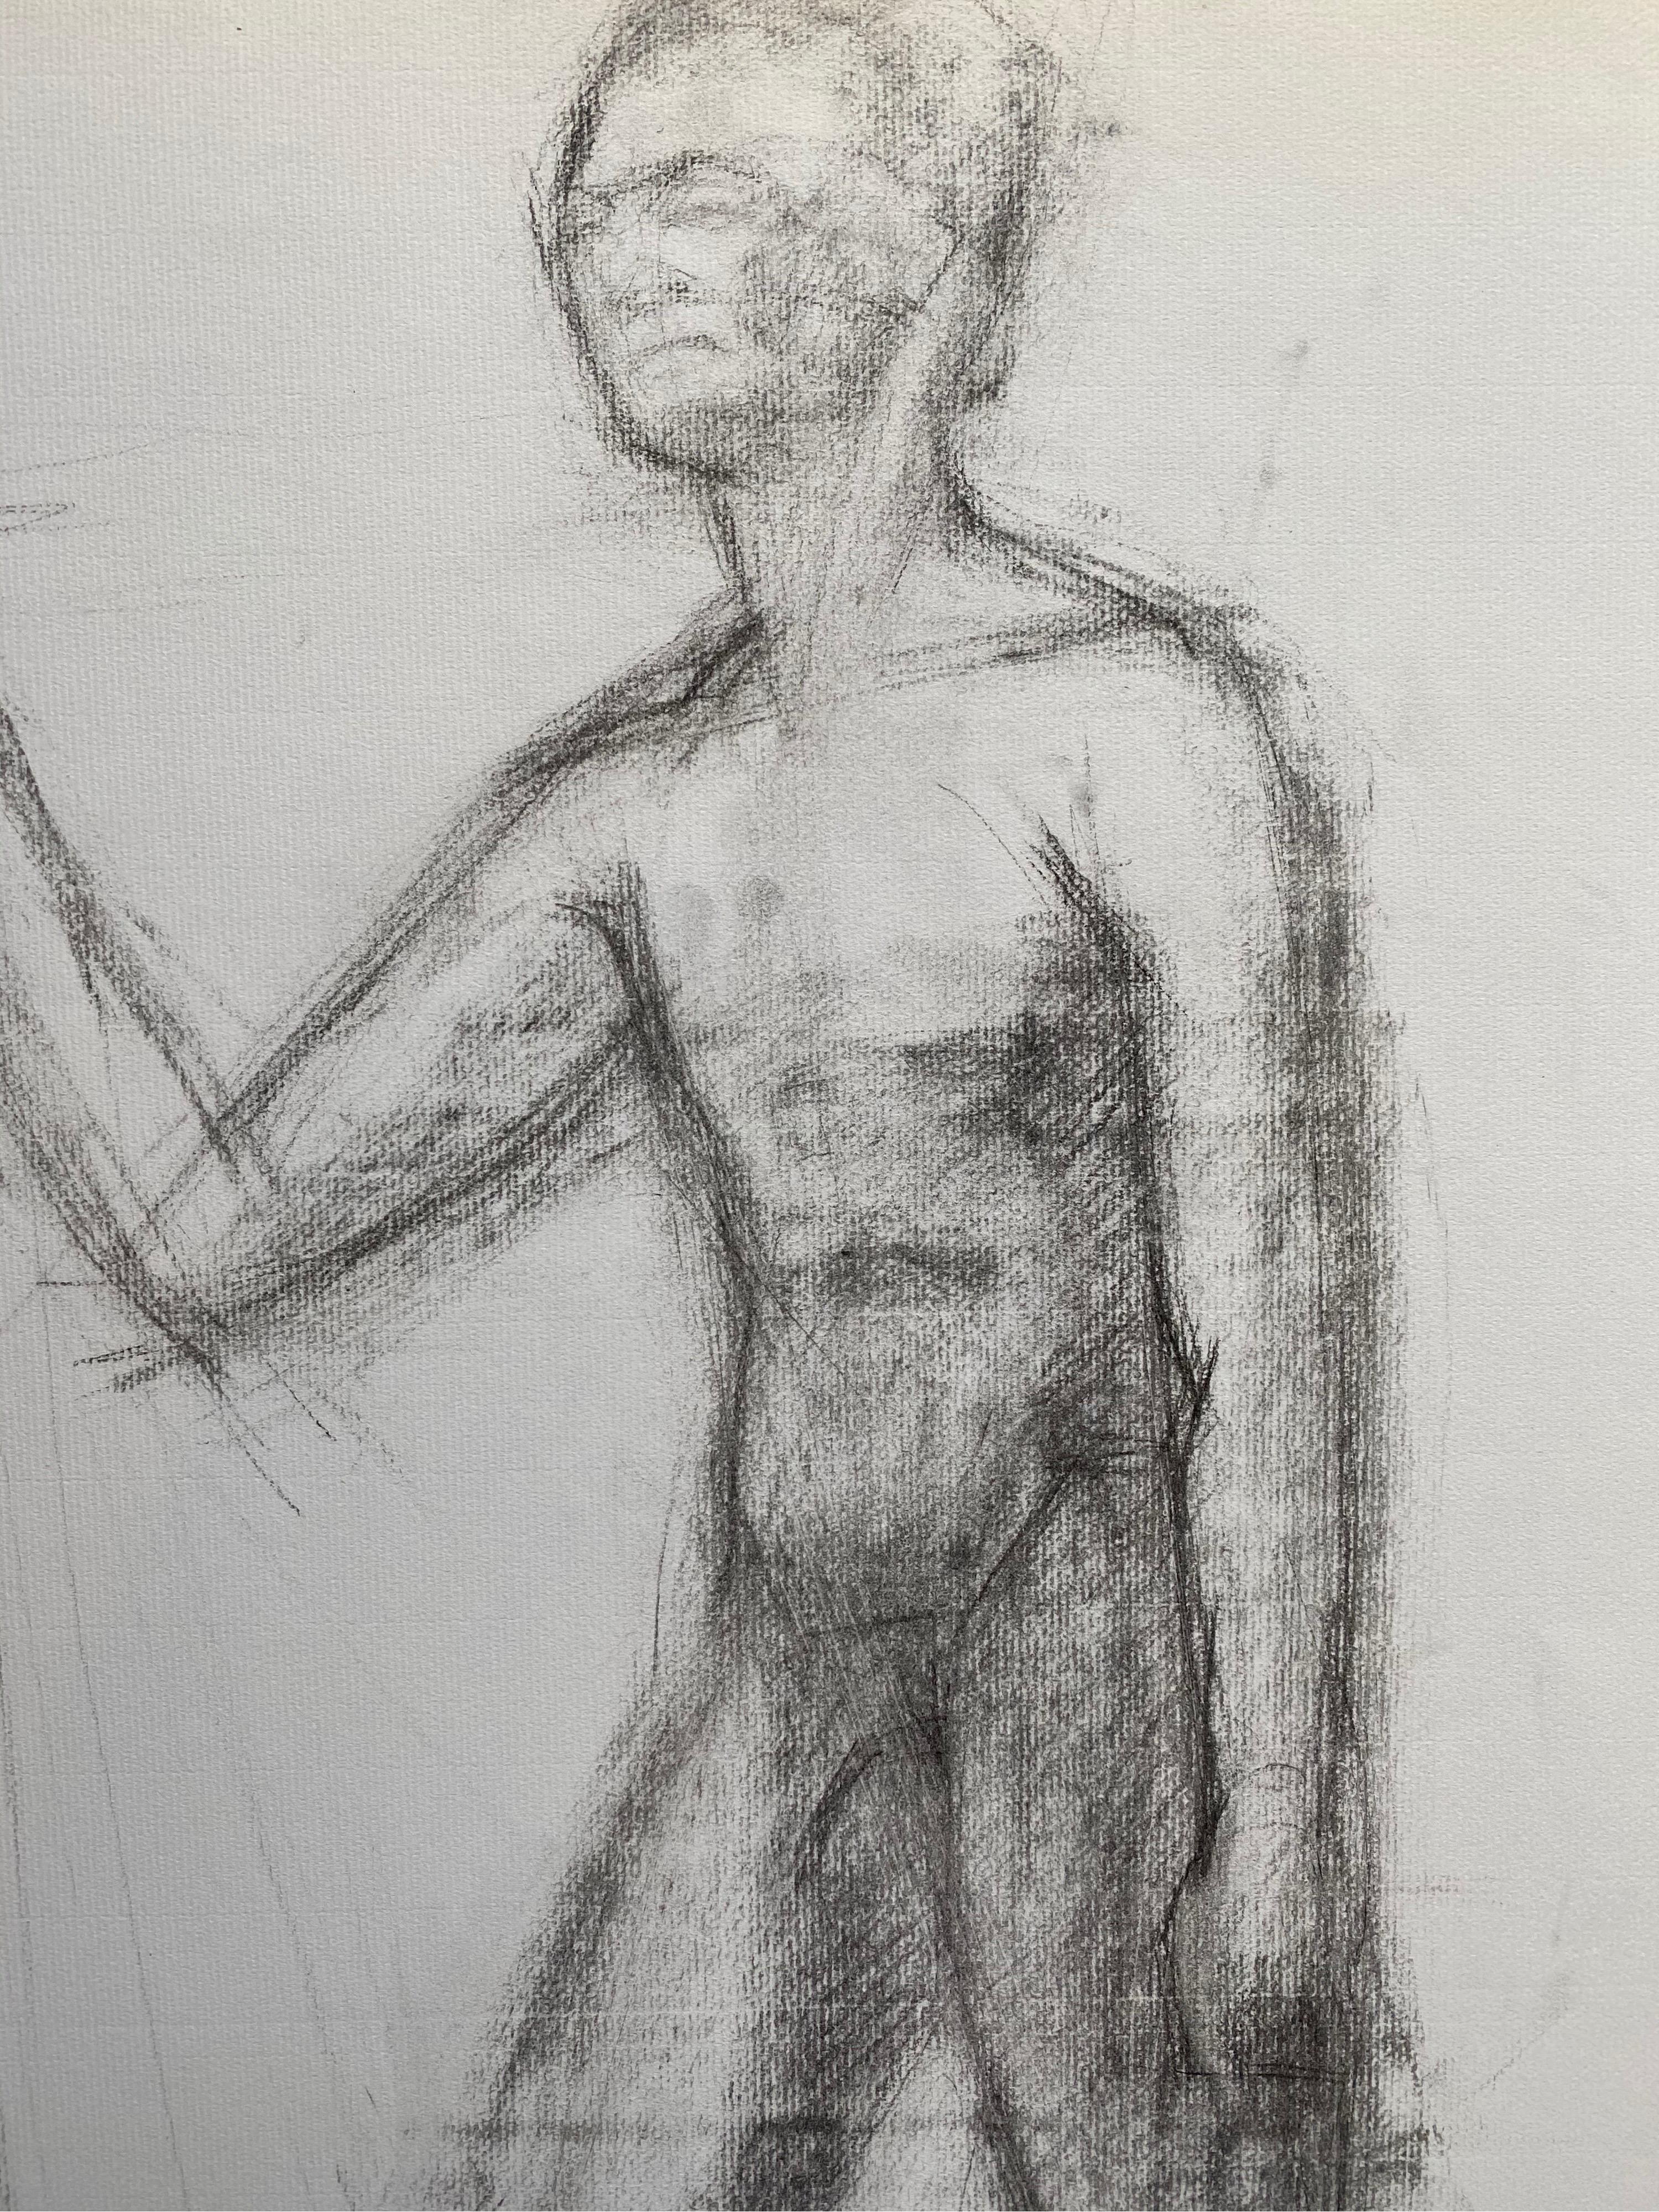 Mid 20th Century French Charcoal Drawing - Portrait of a Standing Nude Man - Art by GENEVIEVE ZONDERVAN (1922-2013)